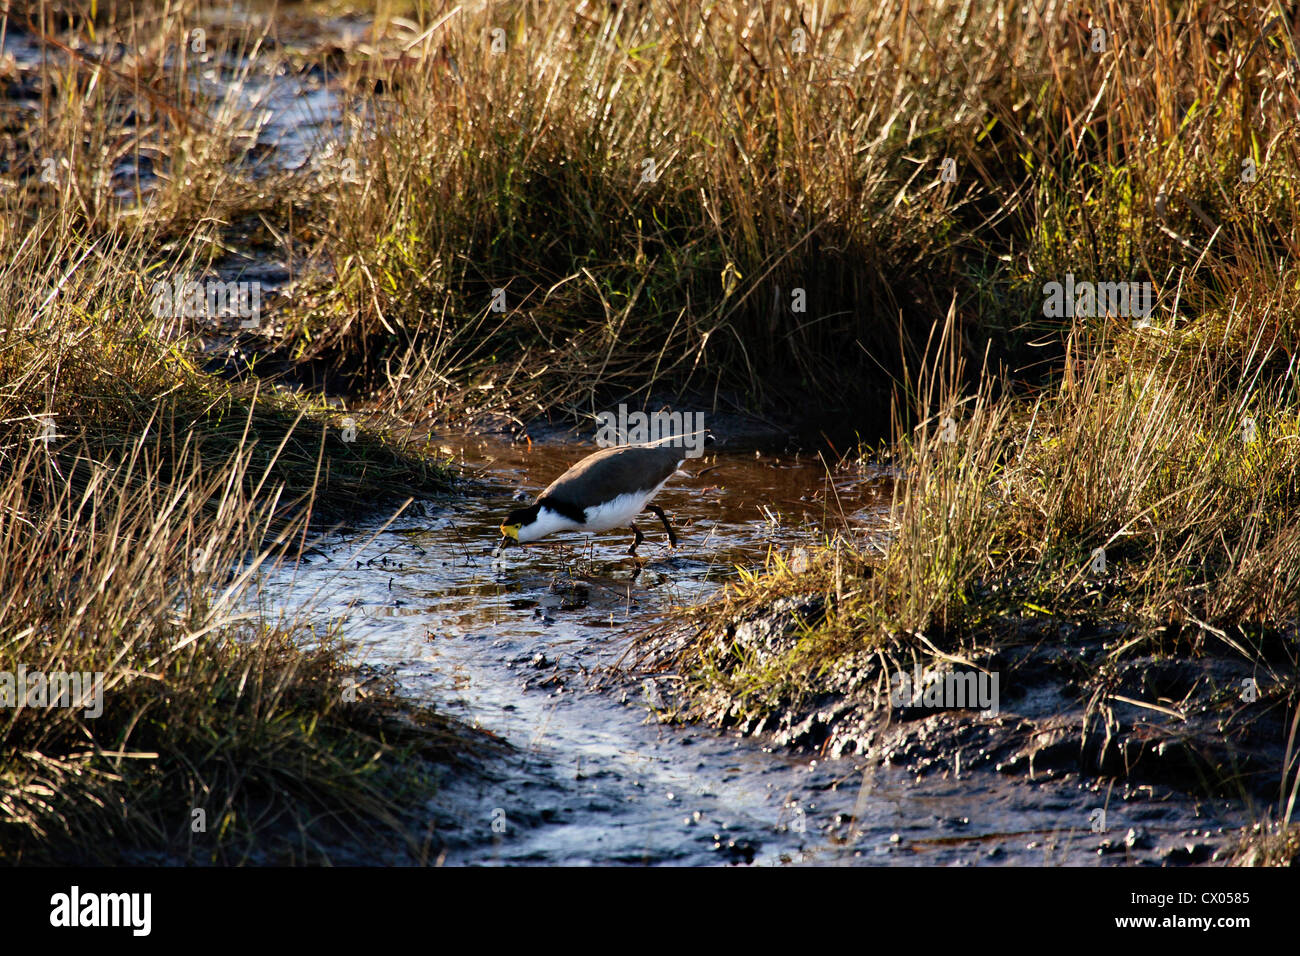 Spur-winged Plover  Masked Lapwing Vanellus novaehollandiae feeding in shallow channel in wetland amongst grasses Stock Photo